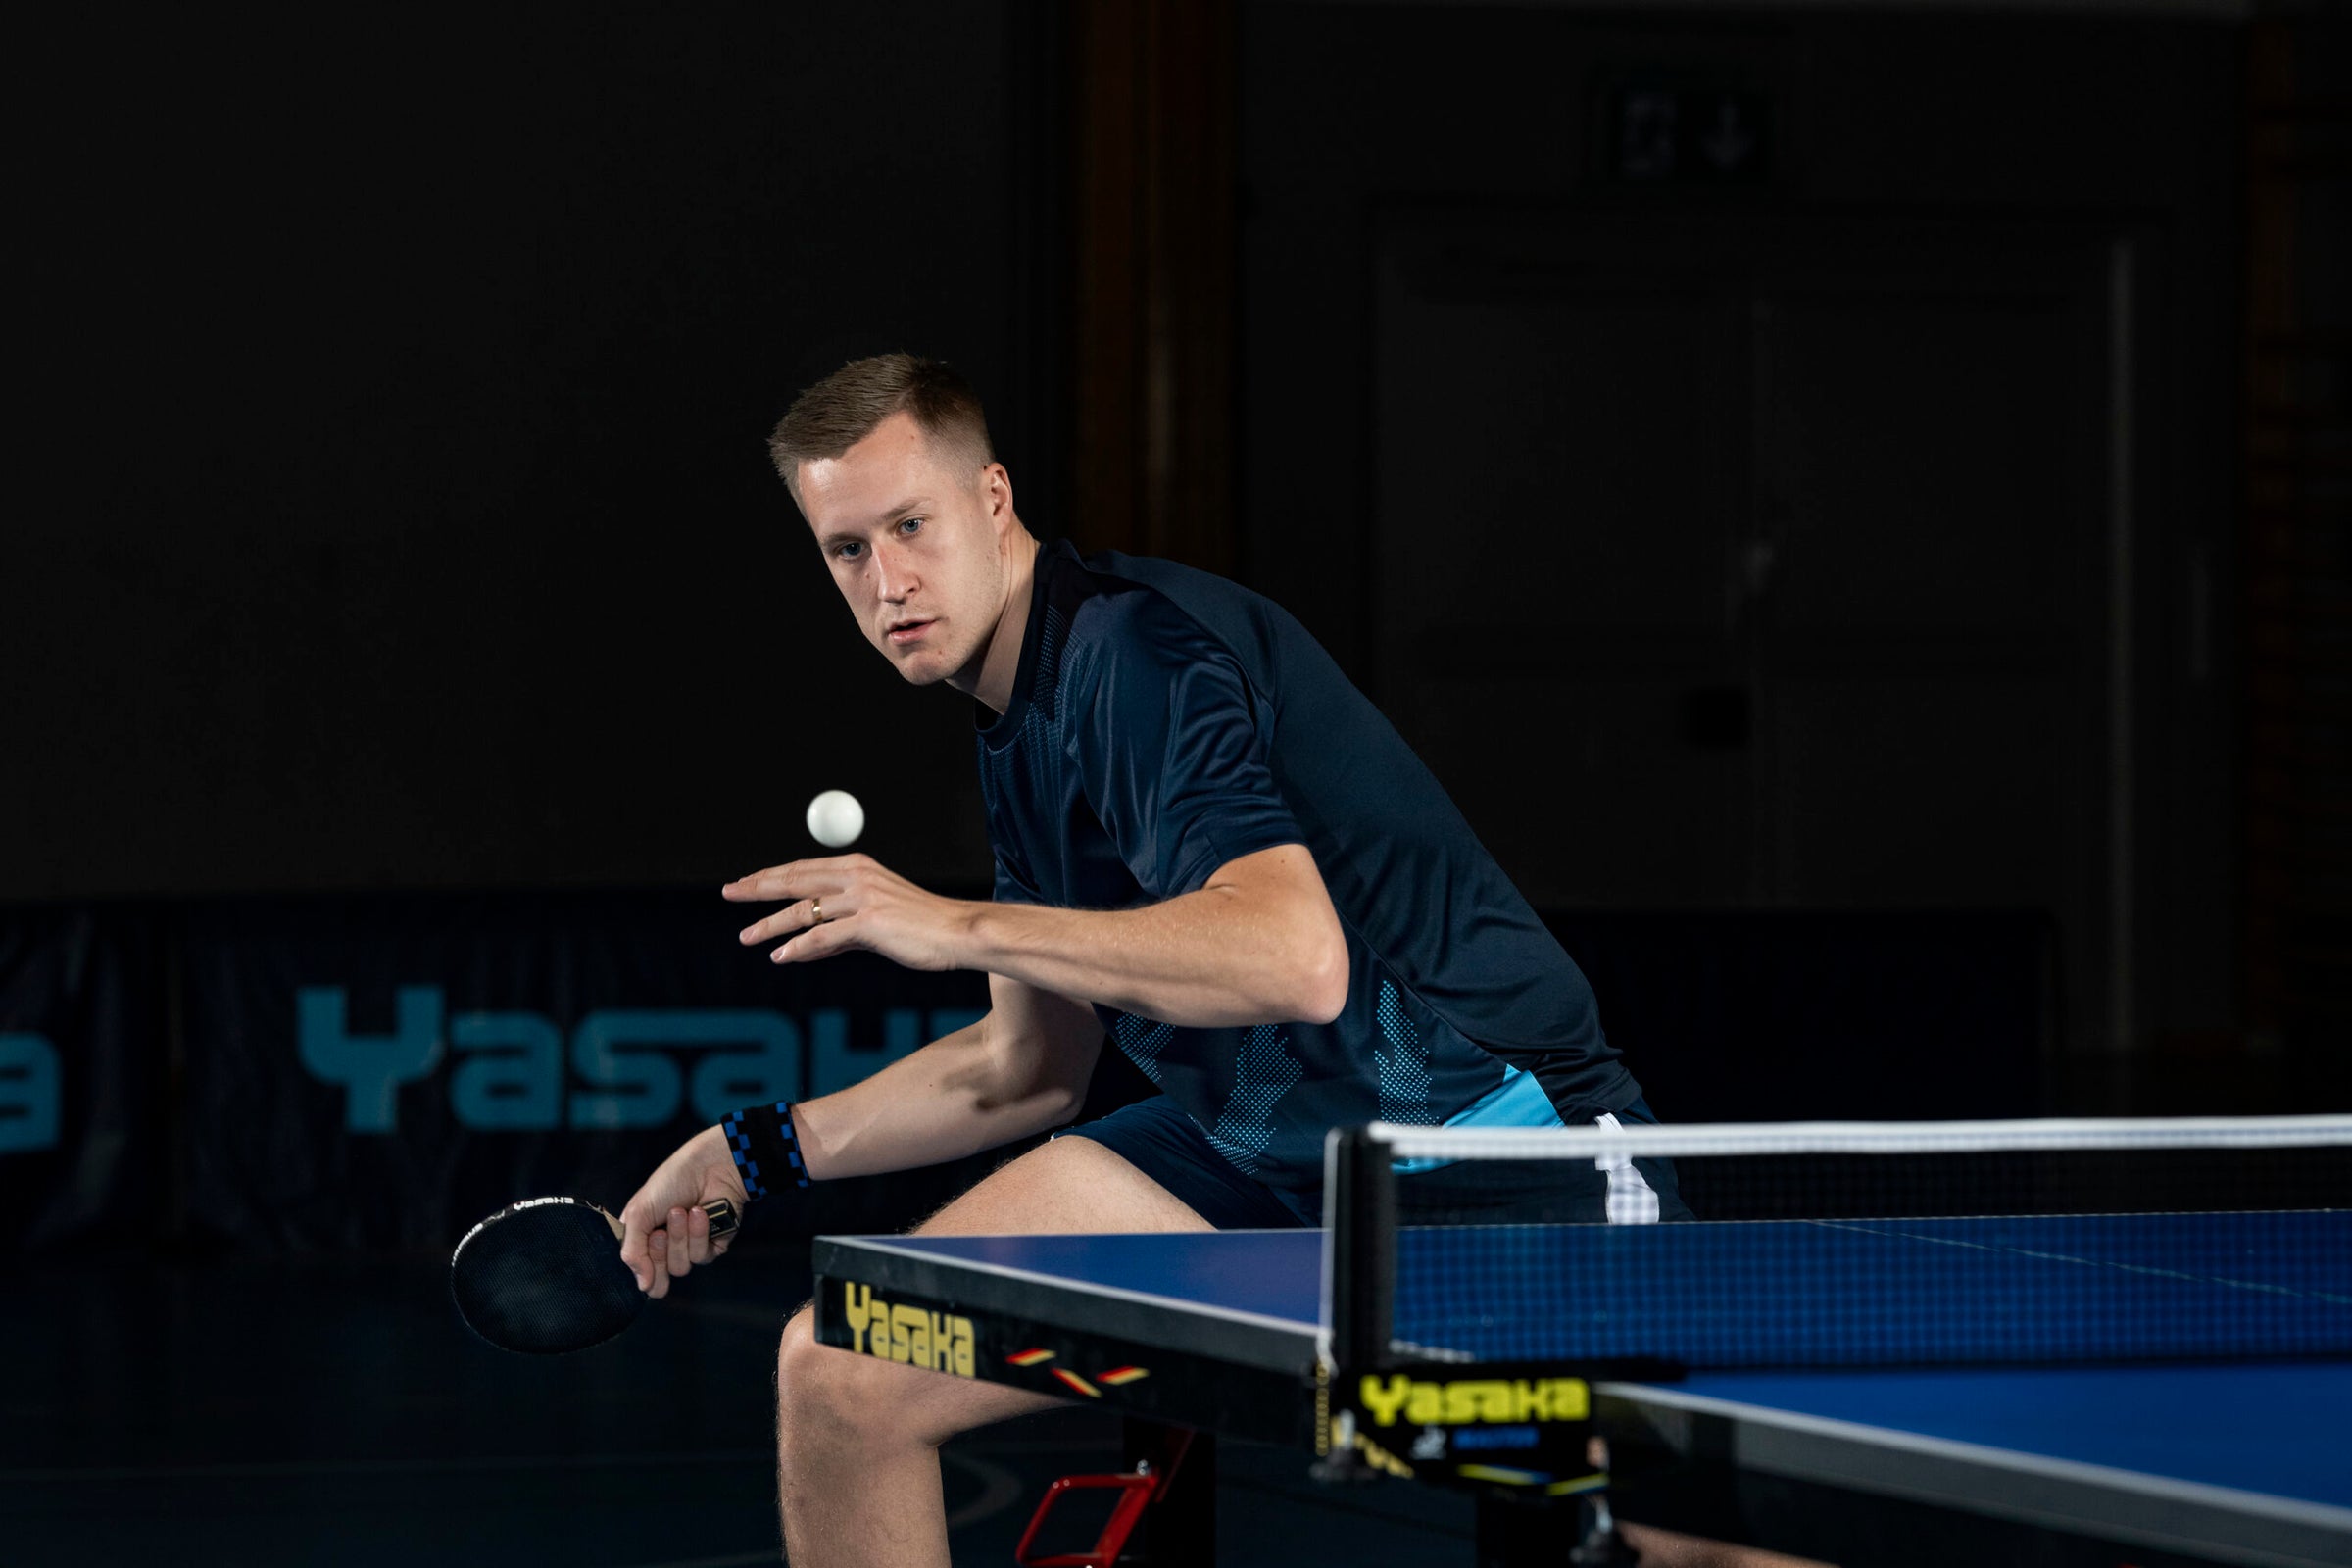 All table tennis products